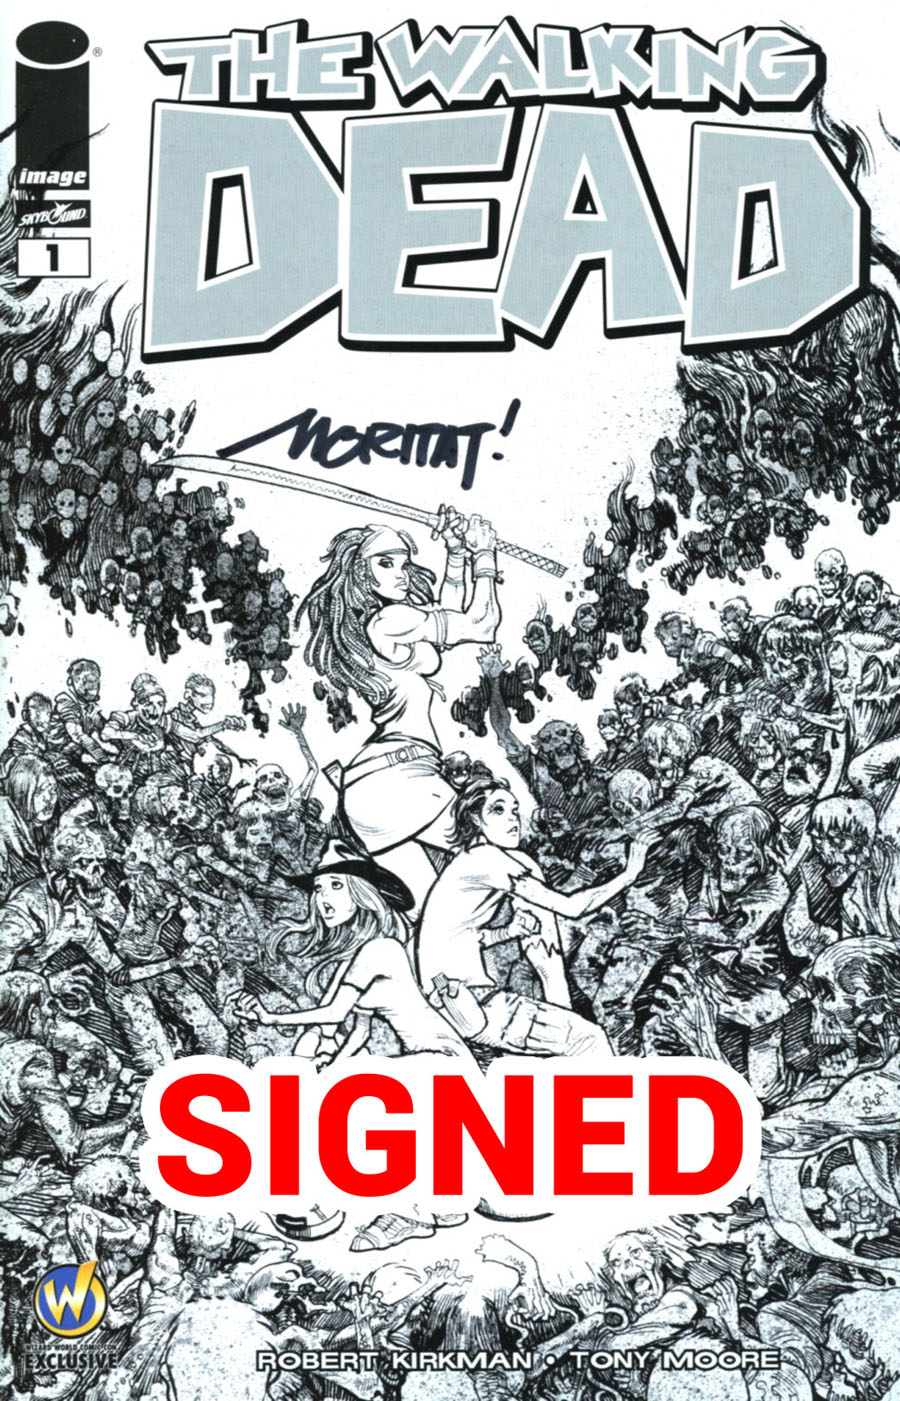 Walking Dead #1 Cover Z-Y Wizard World Comic Con Austin VIP Exclusive Moritat Sketch Variant Cover Signed By Moritat